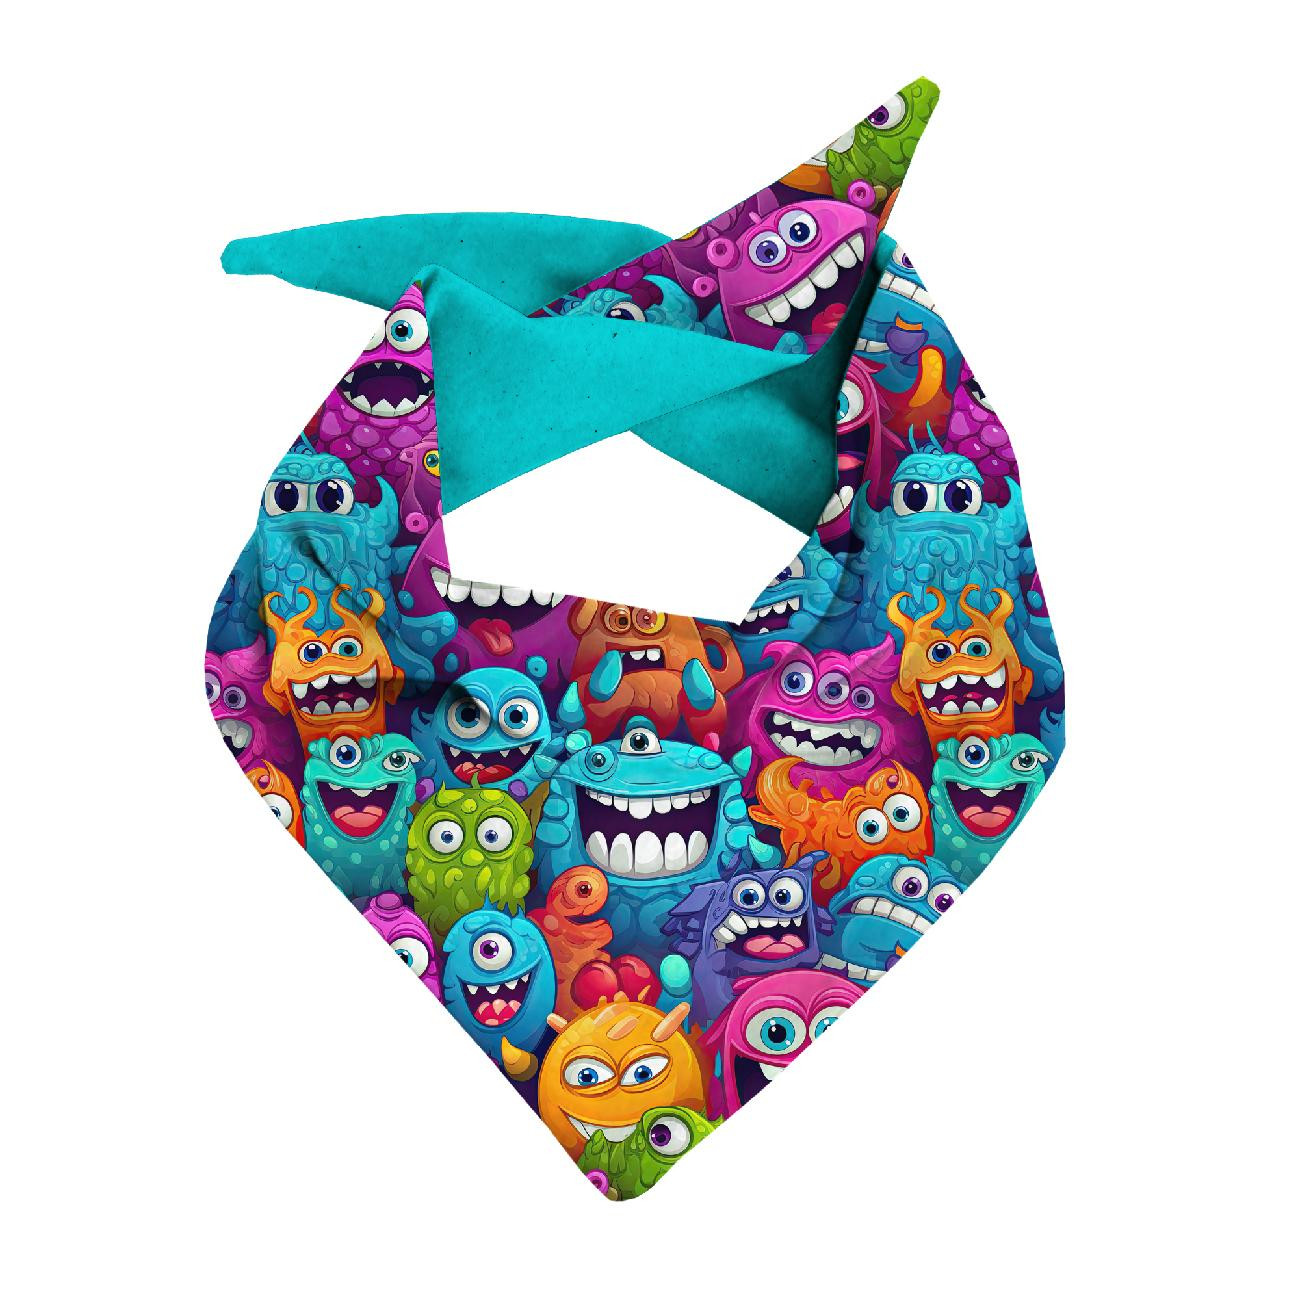 KID'S CAP AND SCARF (CLASSIC) - CRAZY MONSTERS PAT. 3 - sewing set